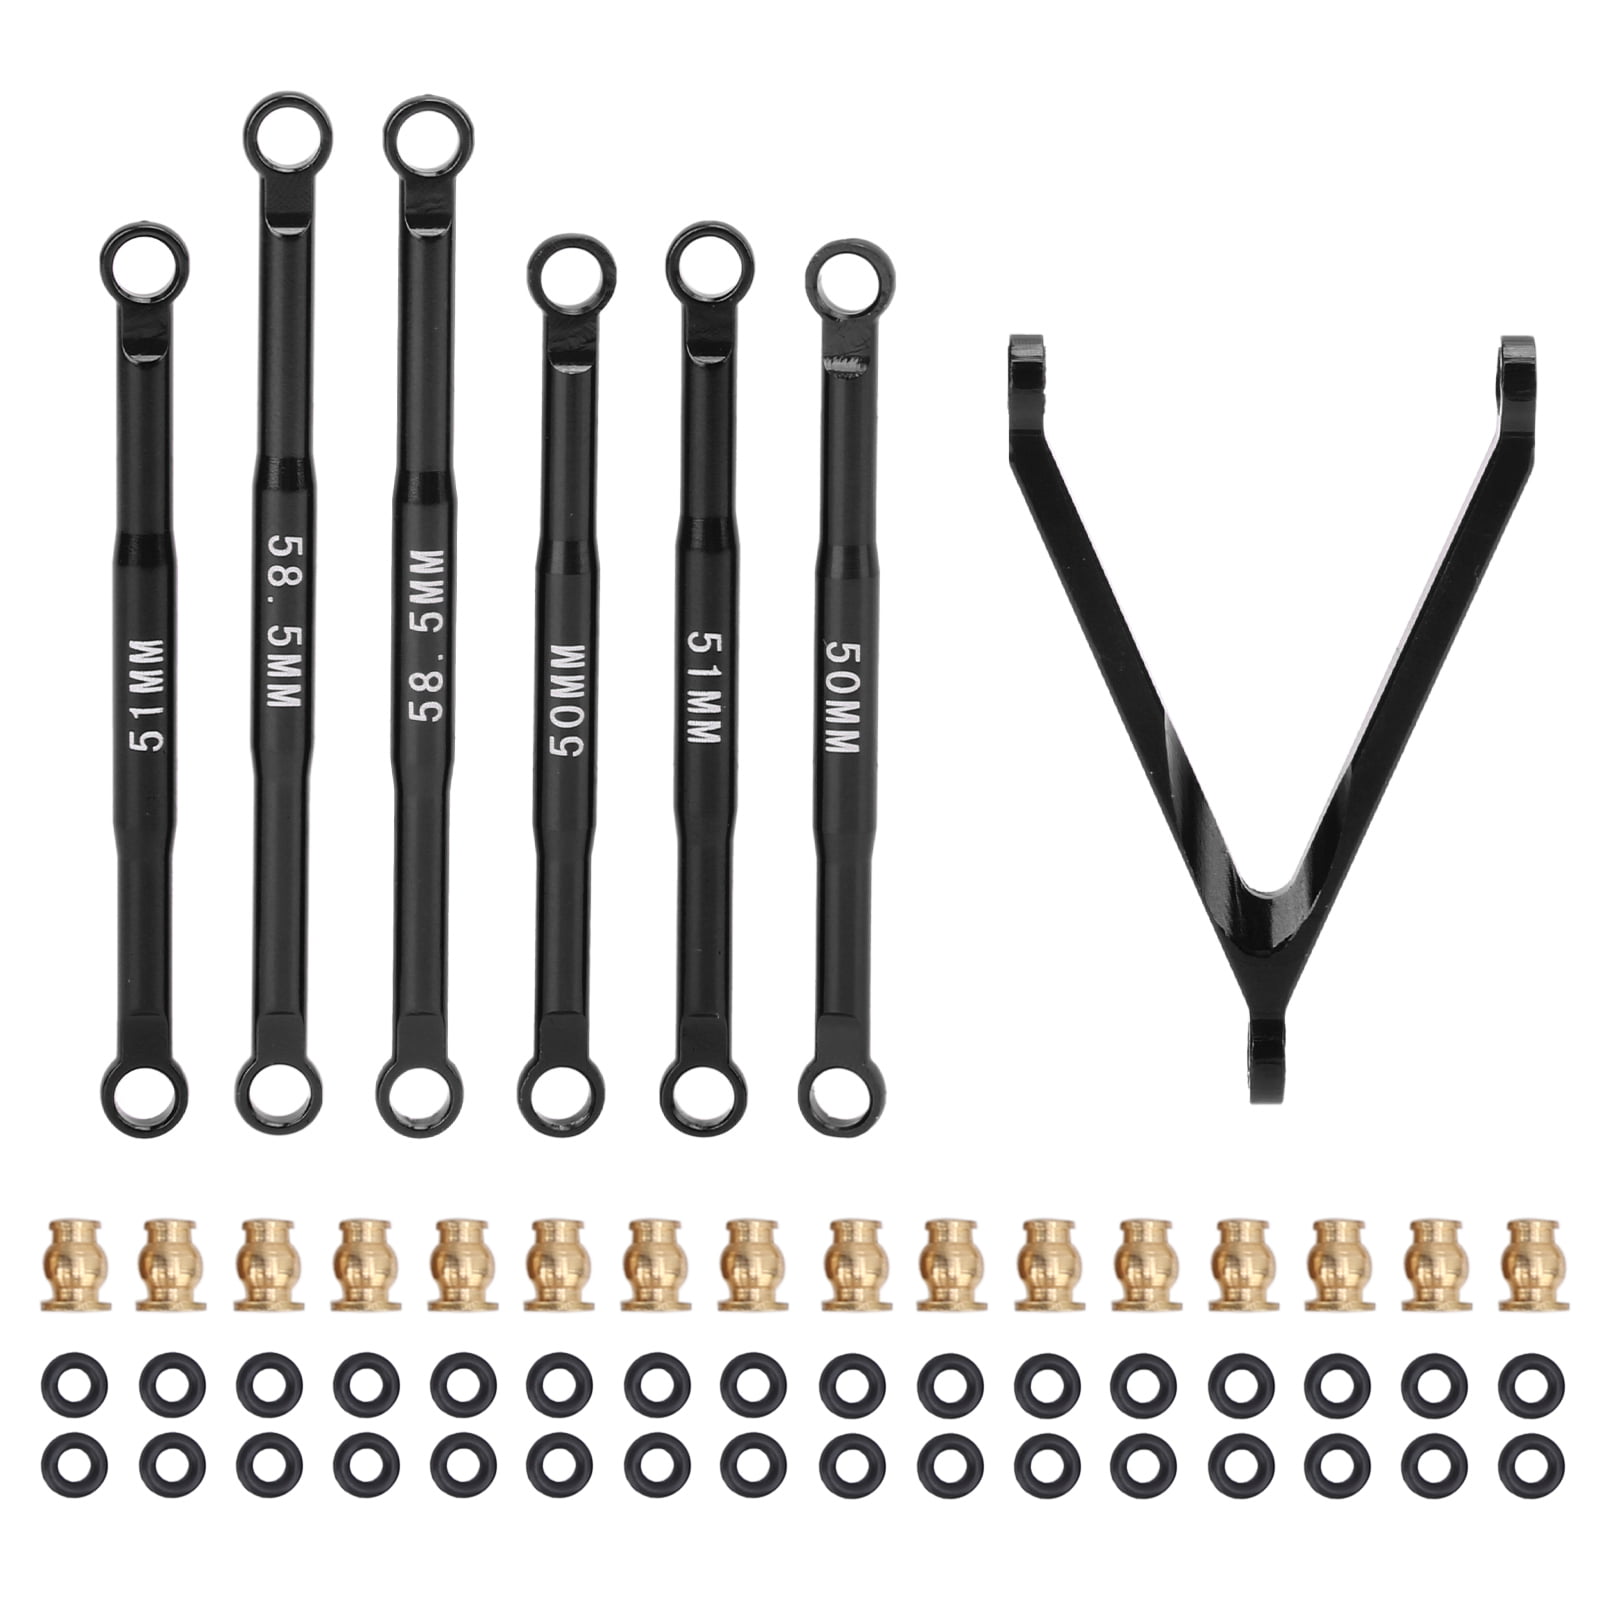 For SCX24 1/24 Axial C10 Ford JEEP RC Car Shell Accessories Link Pull Rod Kits